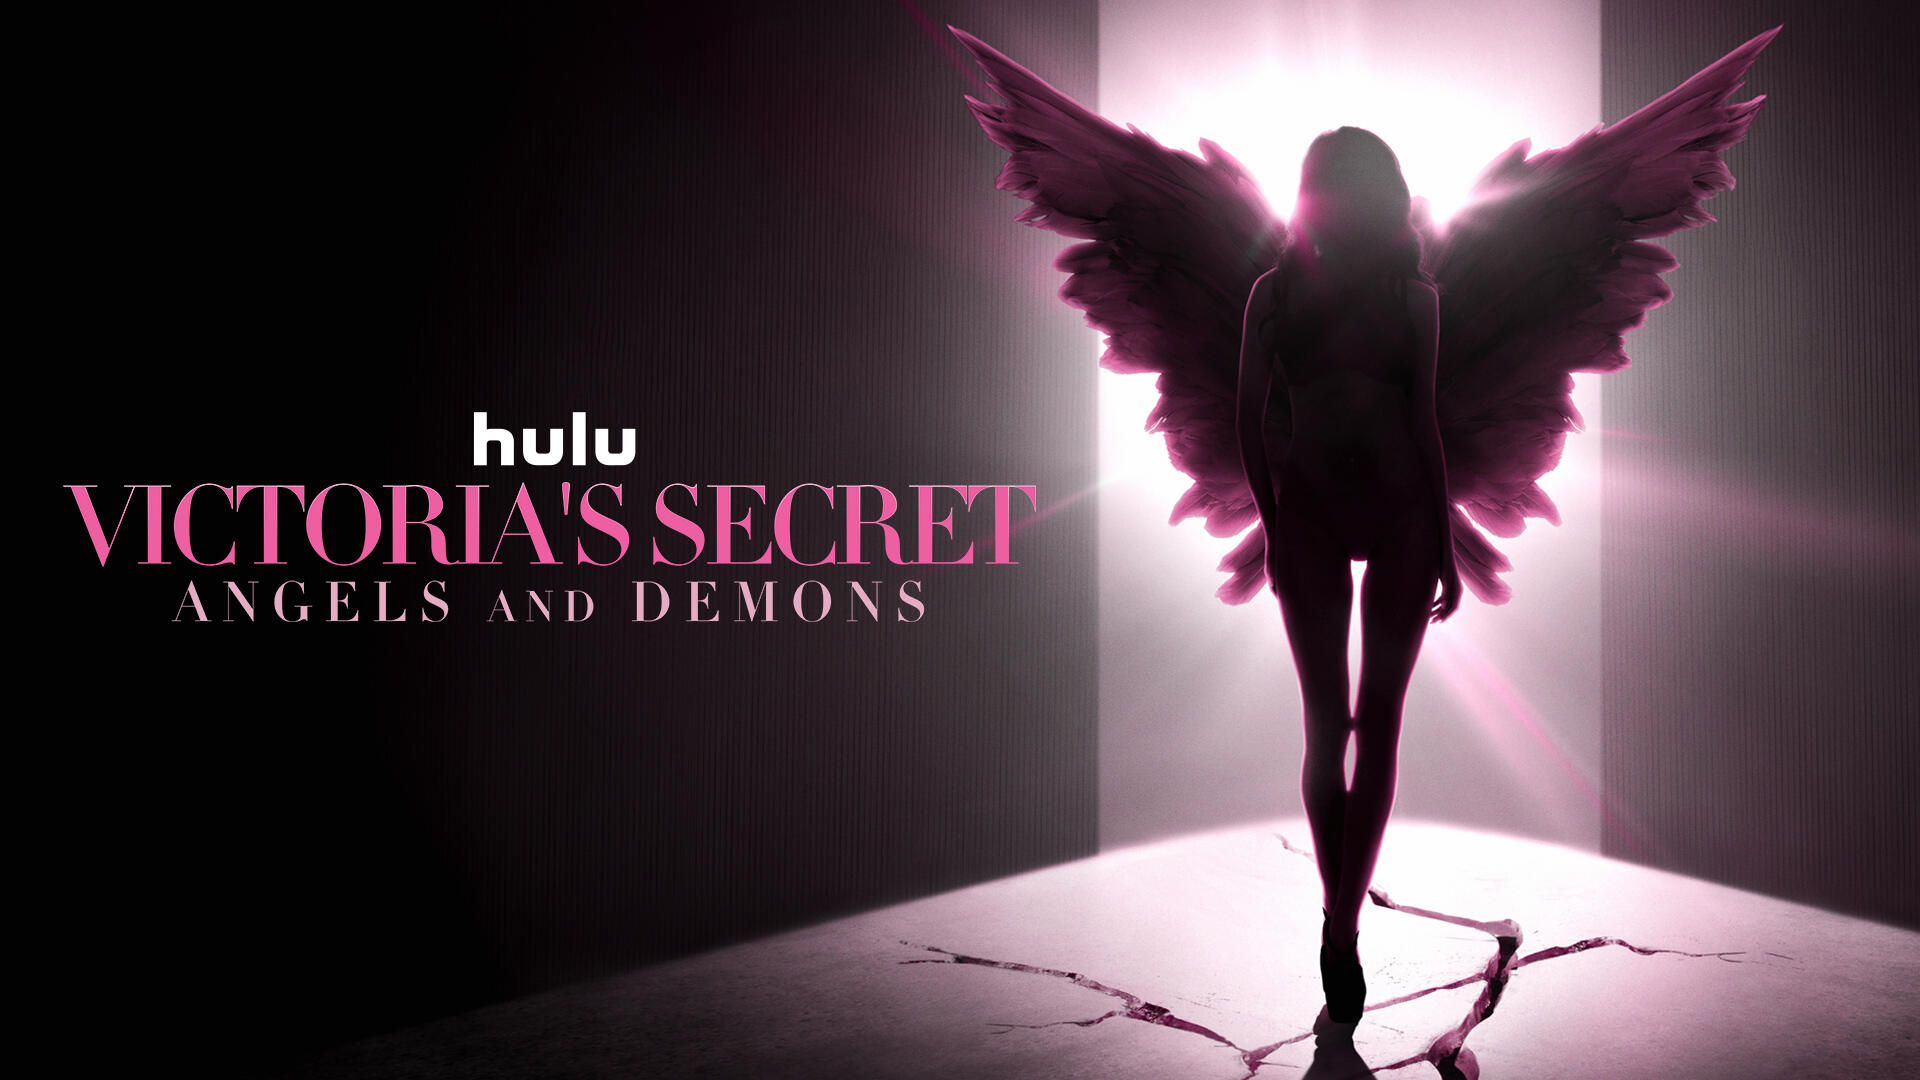 Victoria's Secret: Angels and Demons -- Season 1 -- Investigated with journalistic rigor by director Matt Tyrnauer, this documentary tells the searing and provocative story of the Victoria’s Secret brand and its longtime CEO, the larger-than-life, enigmatic billionaire Les Wexner. The underworld of fashion, the billionaire class, and Jeffrey Epstein are all revealed to be inextricably intertwined with the fall of this legendary brand in Victoria’s Secret: Angels and Demons. (Courtesy of Hulu)